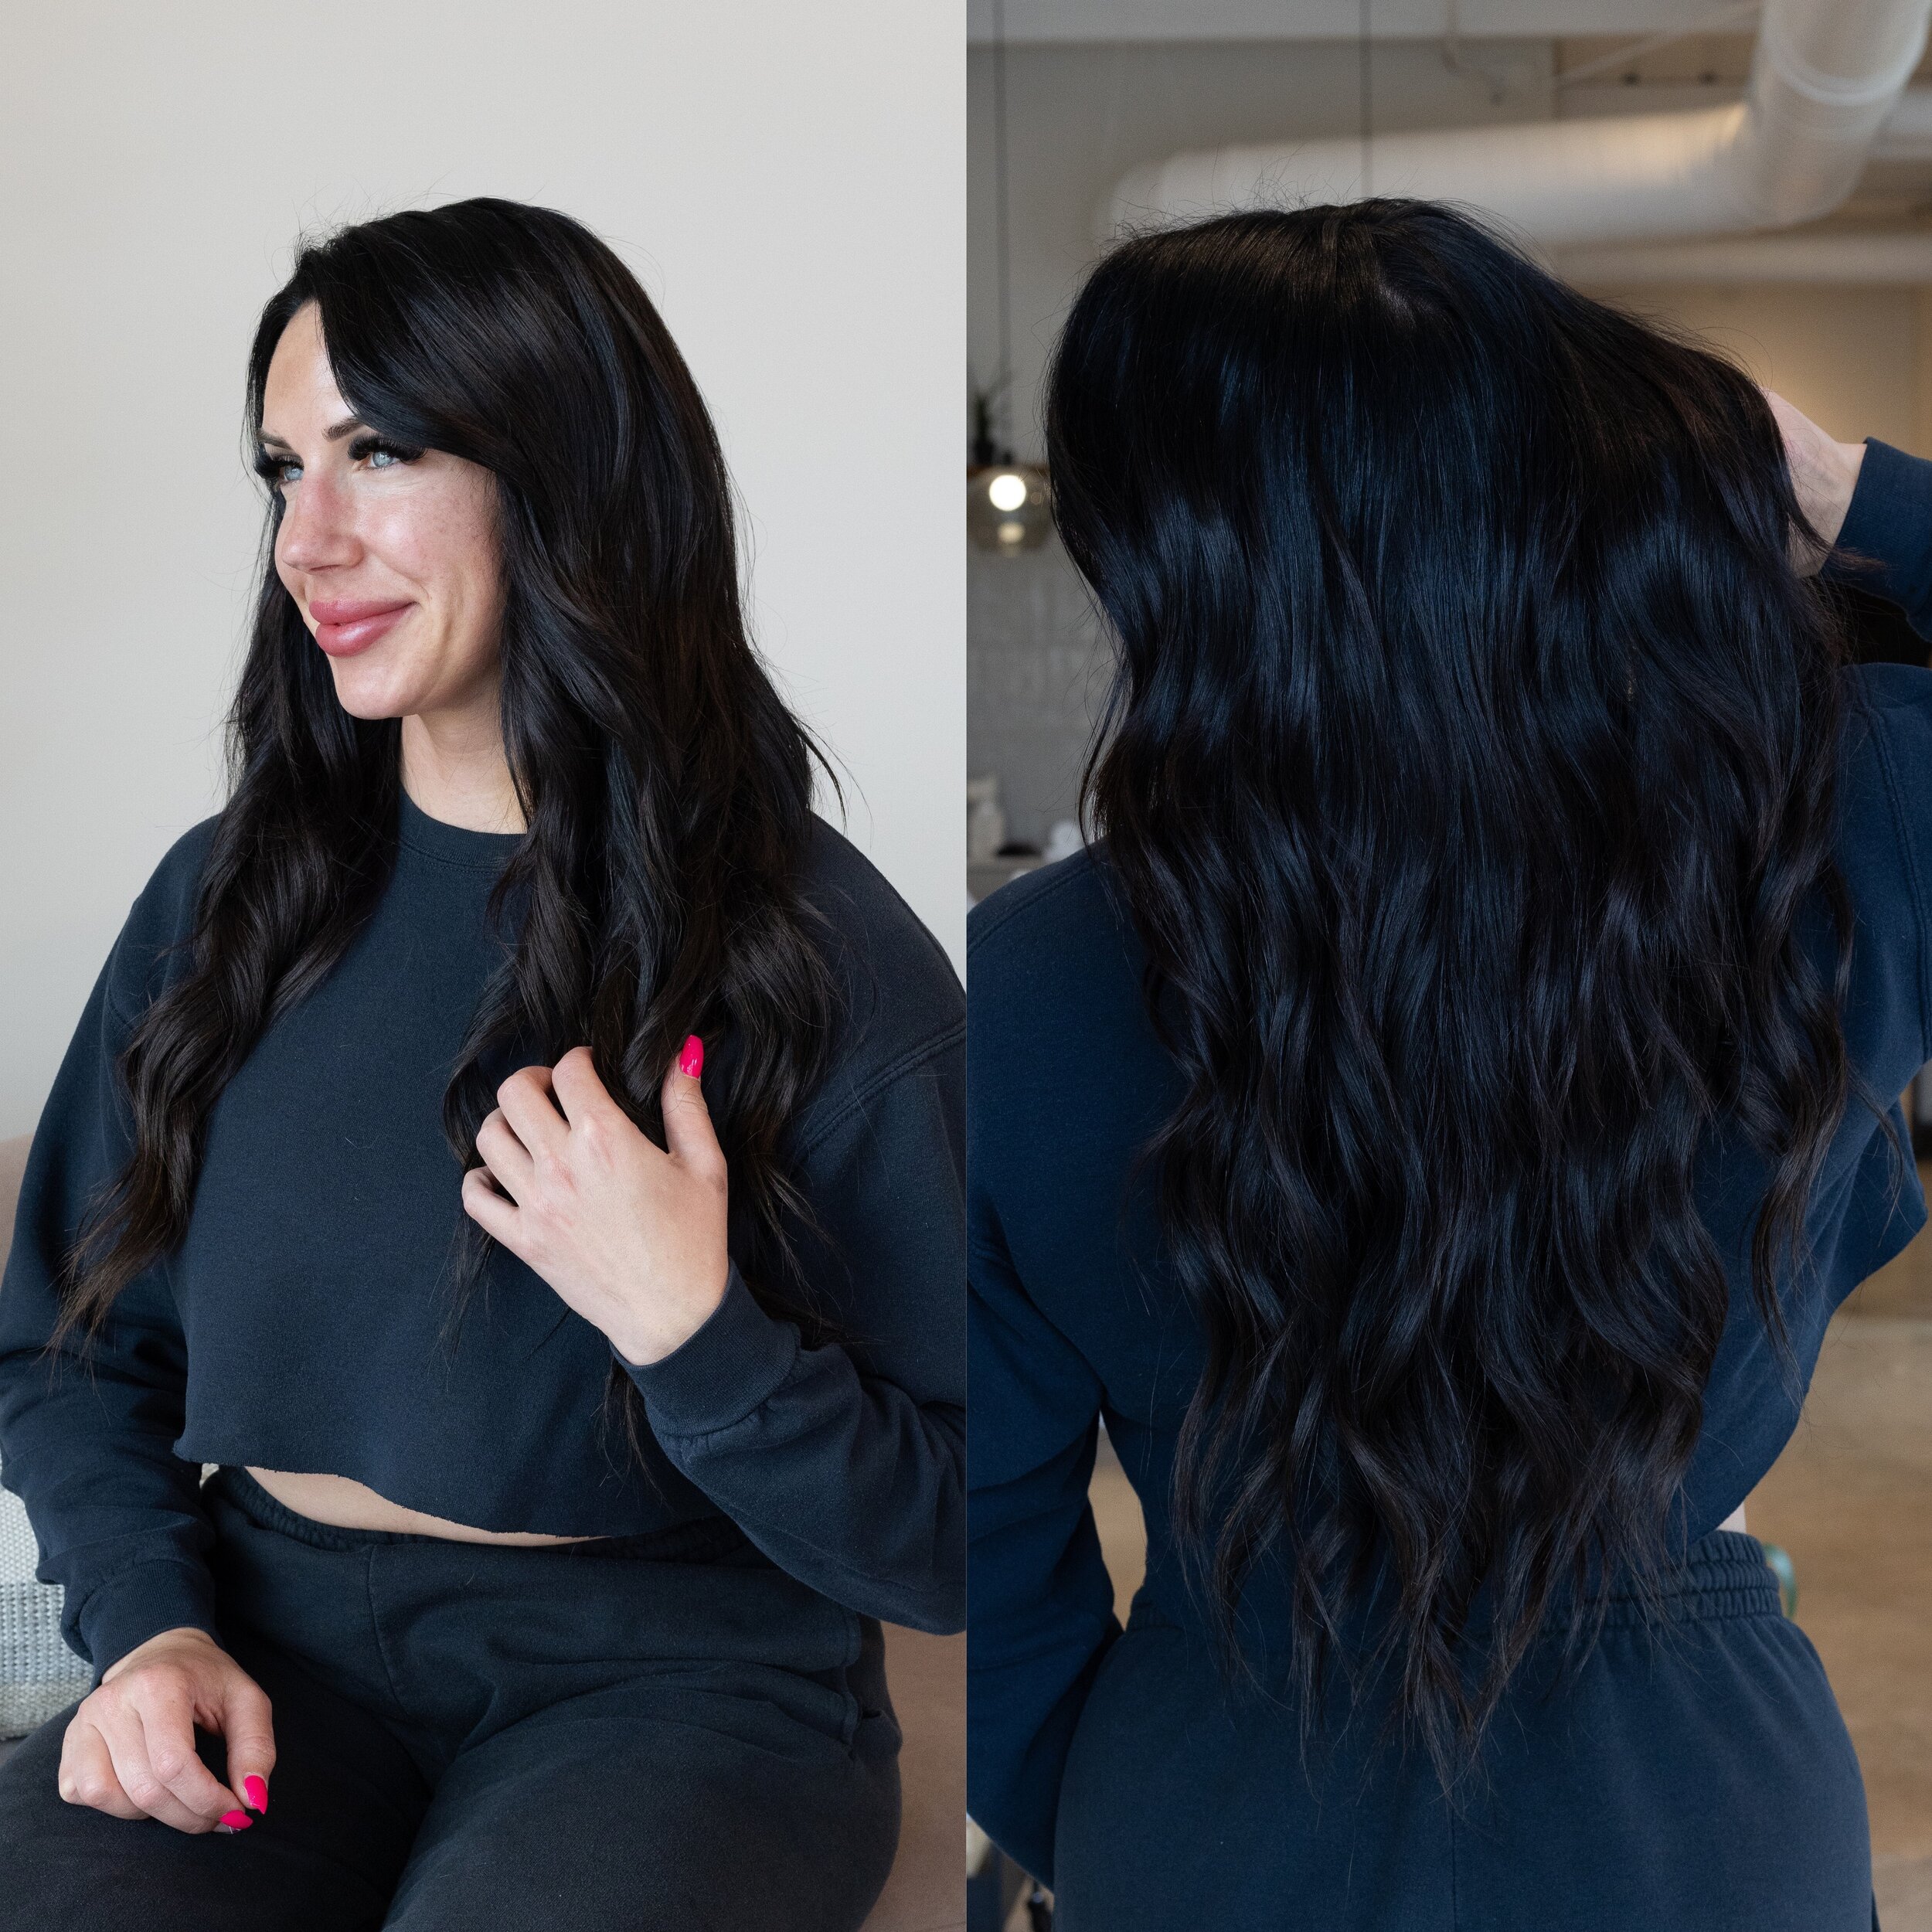 A Canvas babe wearing our 22&rdquo; inch N&deg; 3.0. 

Canvas Hair Extensions are available to order via your Canvas Pro account. Apply on our website for access. 

&mdash;&mdash;&mdash;

📍 Casa Meka
1010 Laurens Rd Suite D, Greenville, SC 29607
🌐 